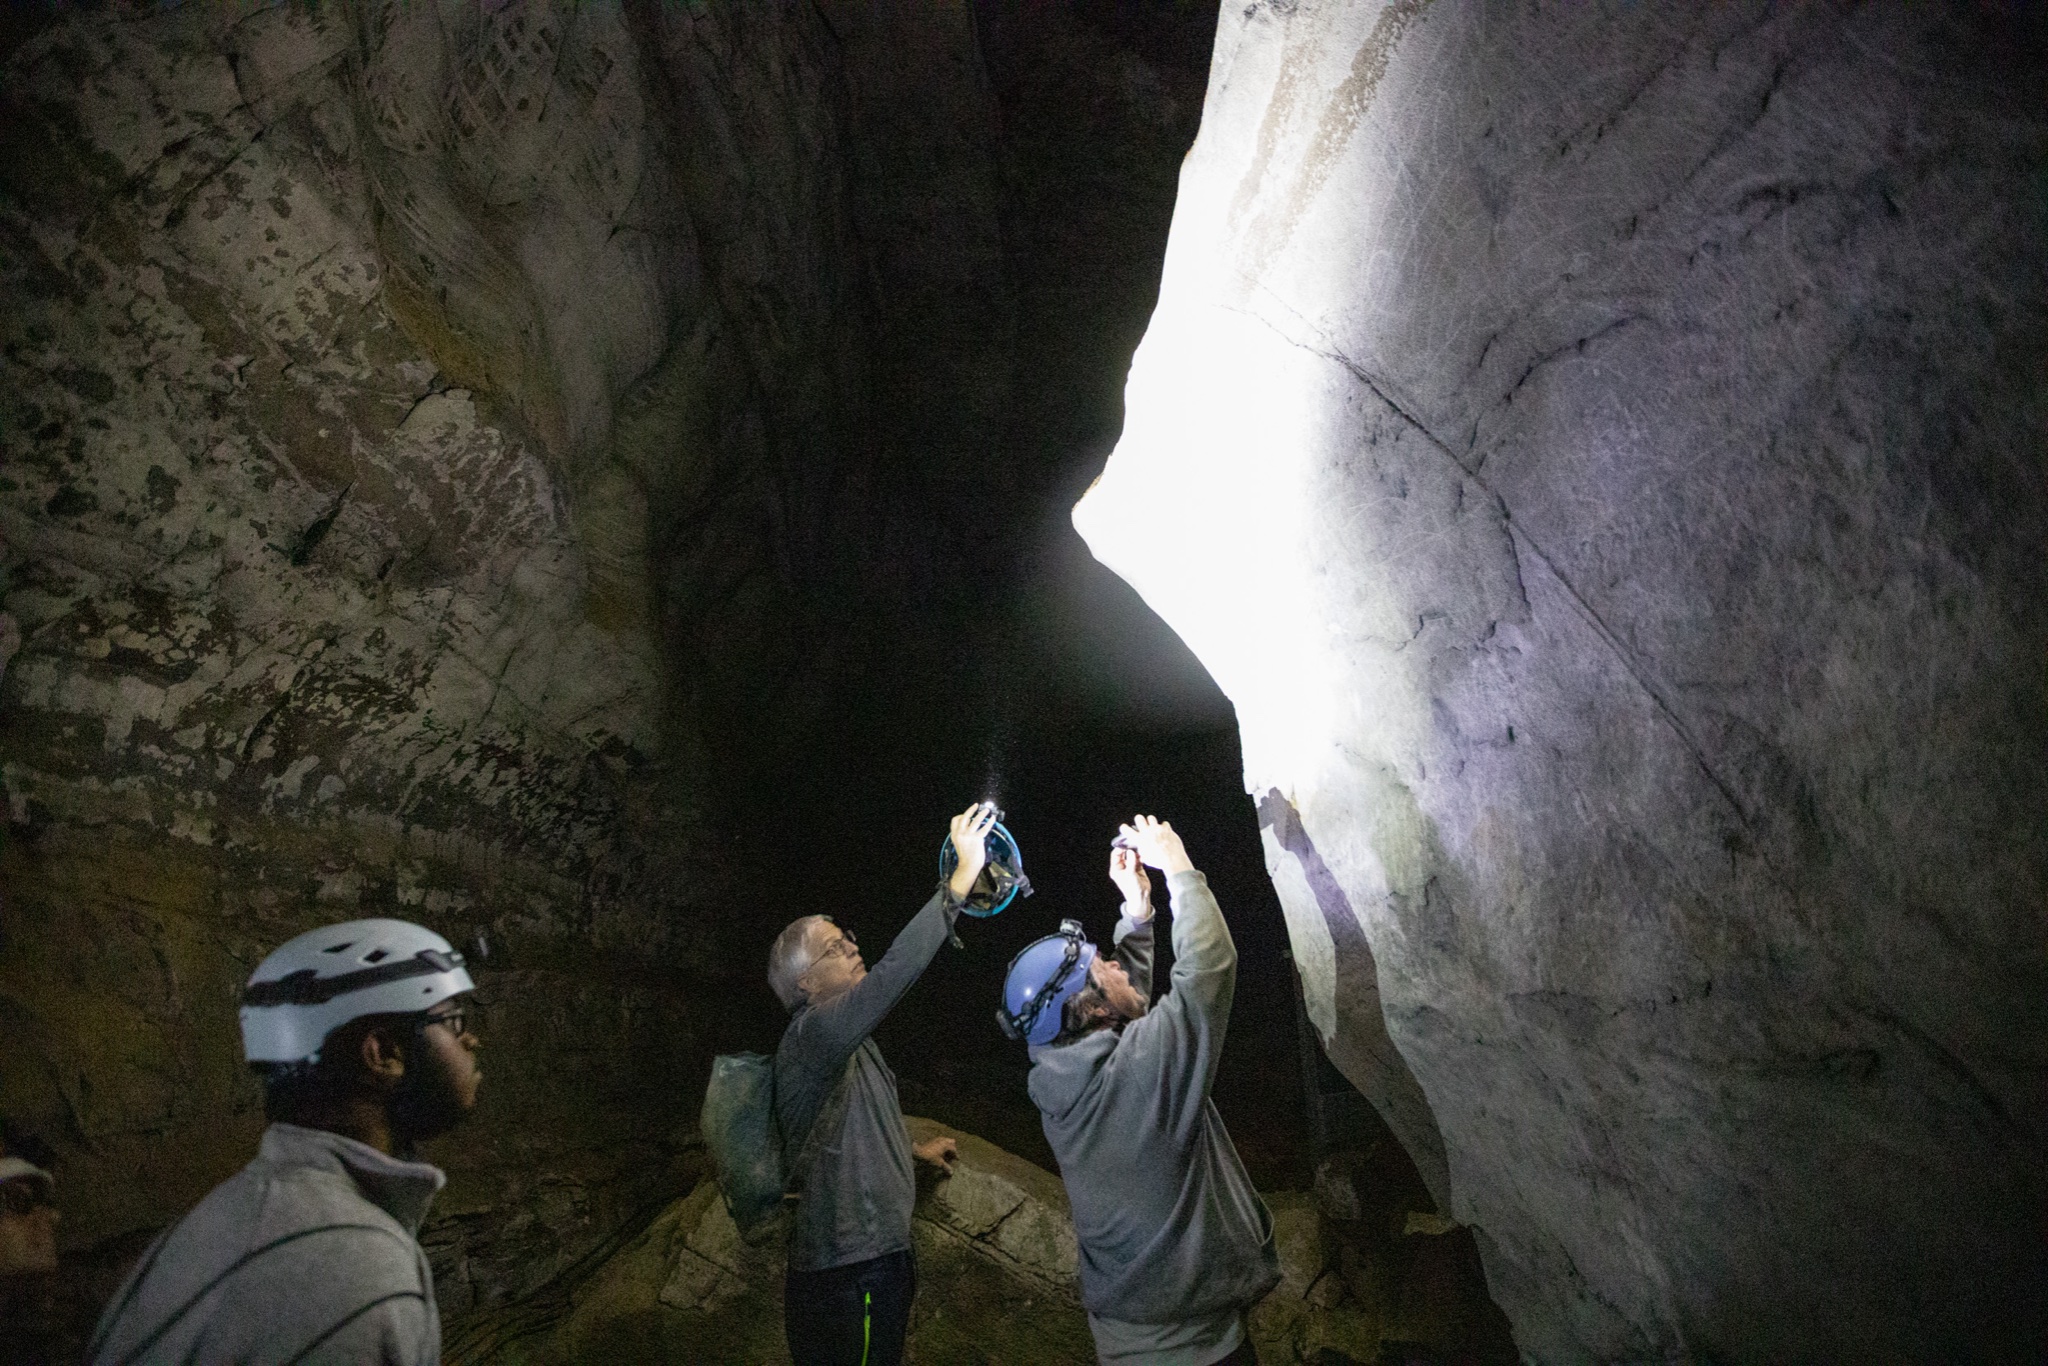 WKU professor shows 2 people rock formation in Mammoth Cave.